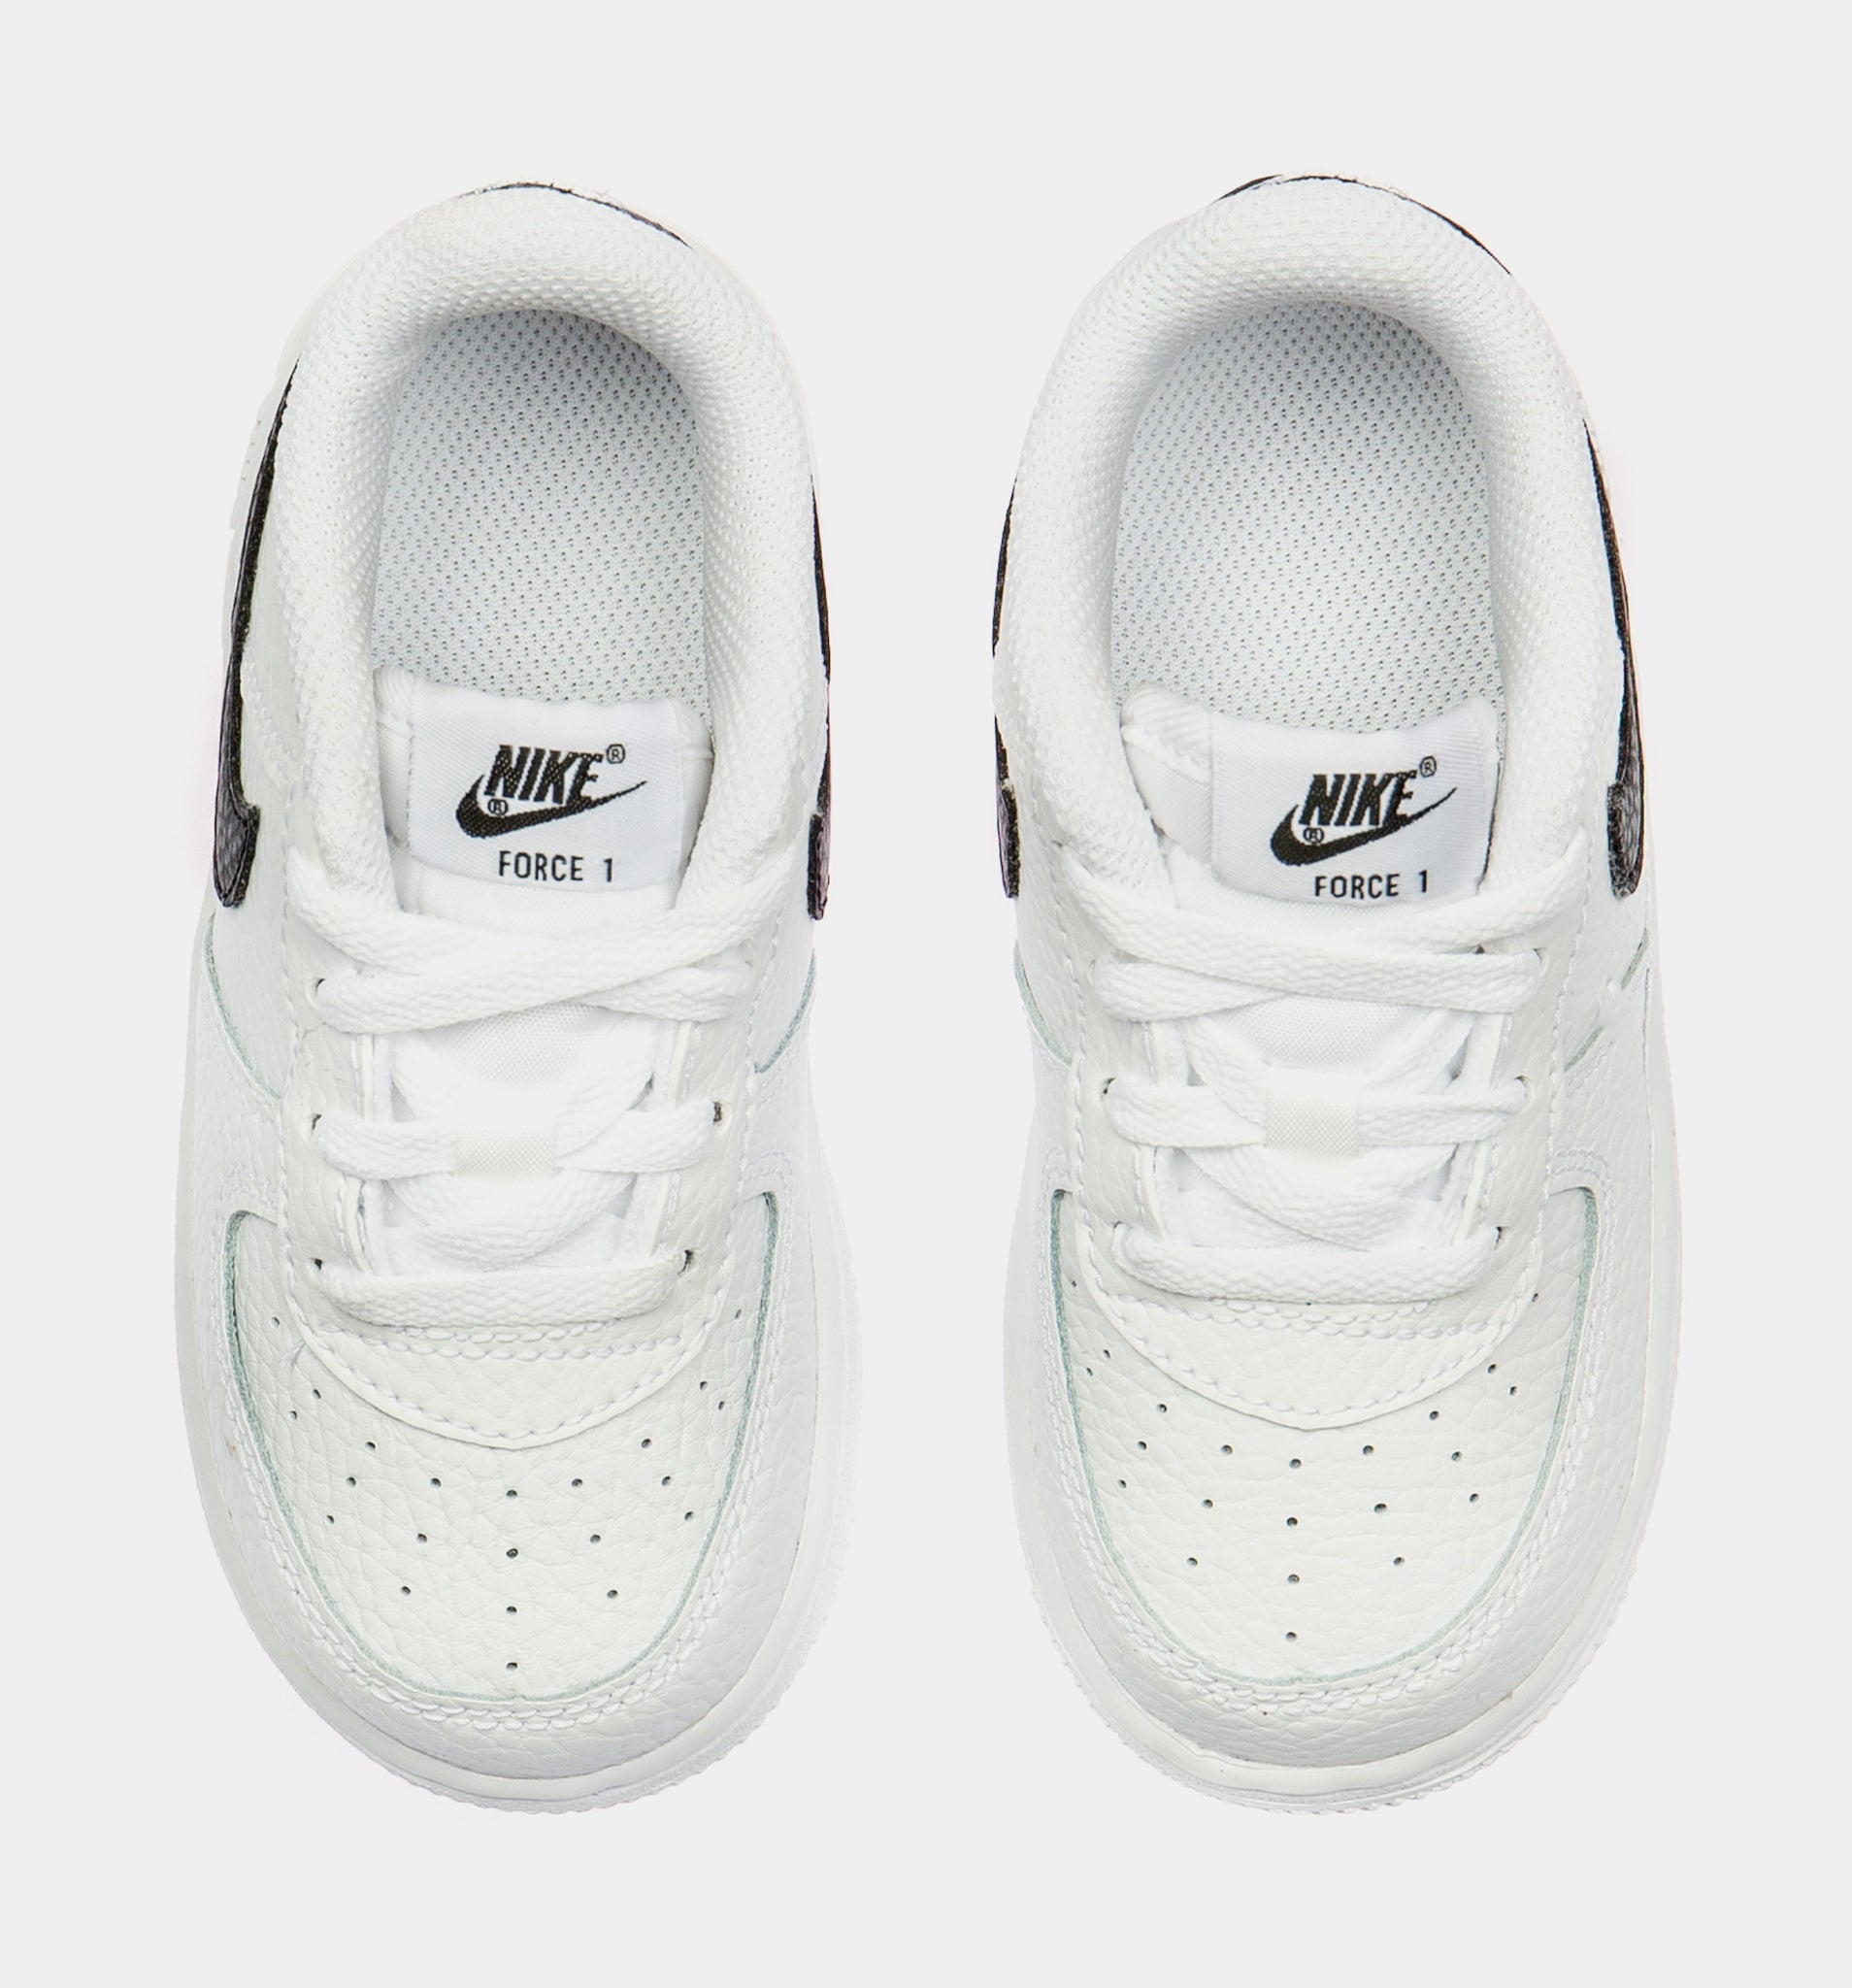  Nike Air Force One Mid Sneaker-Infant Toddler White 4